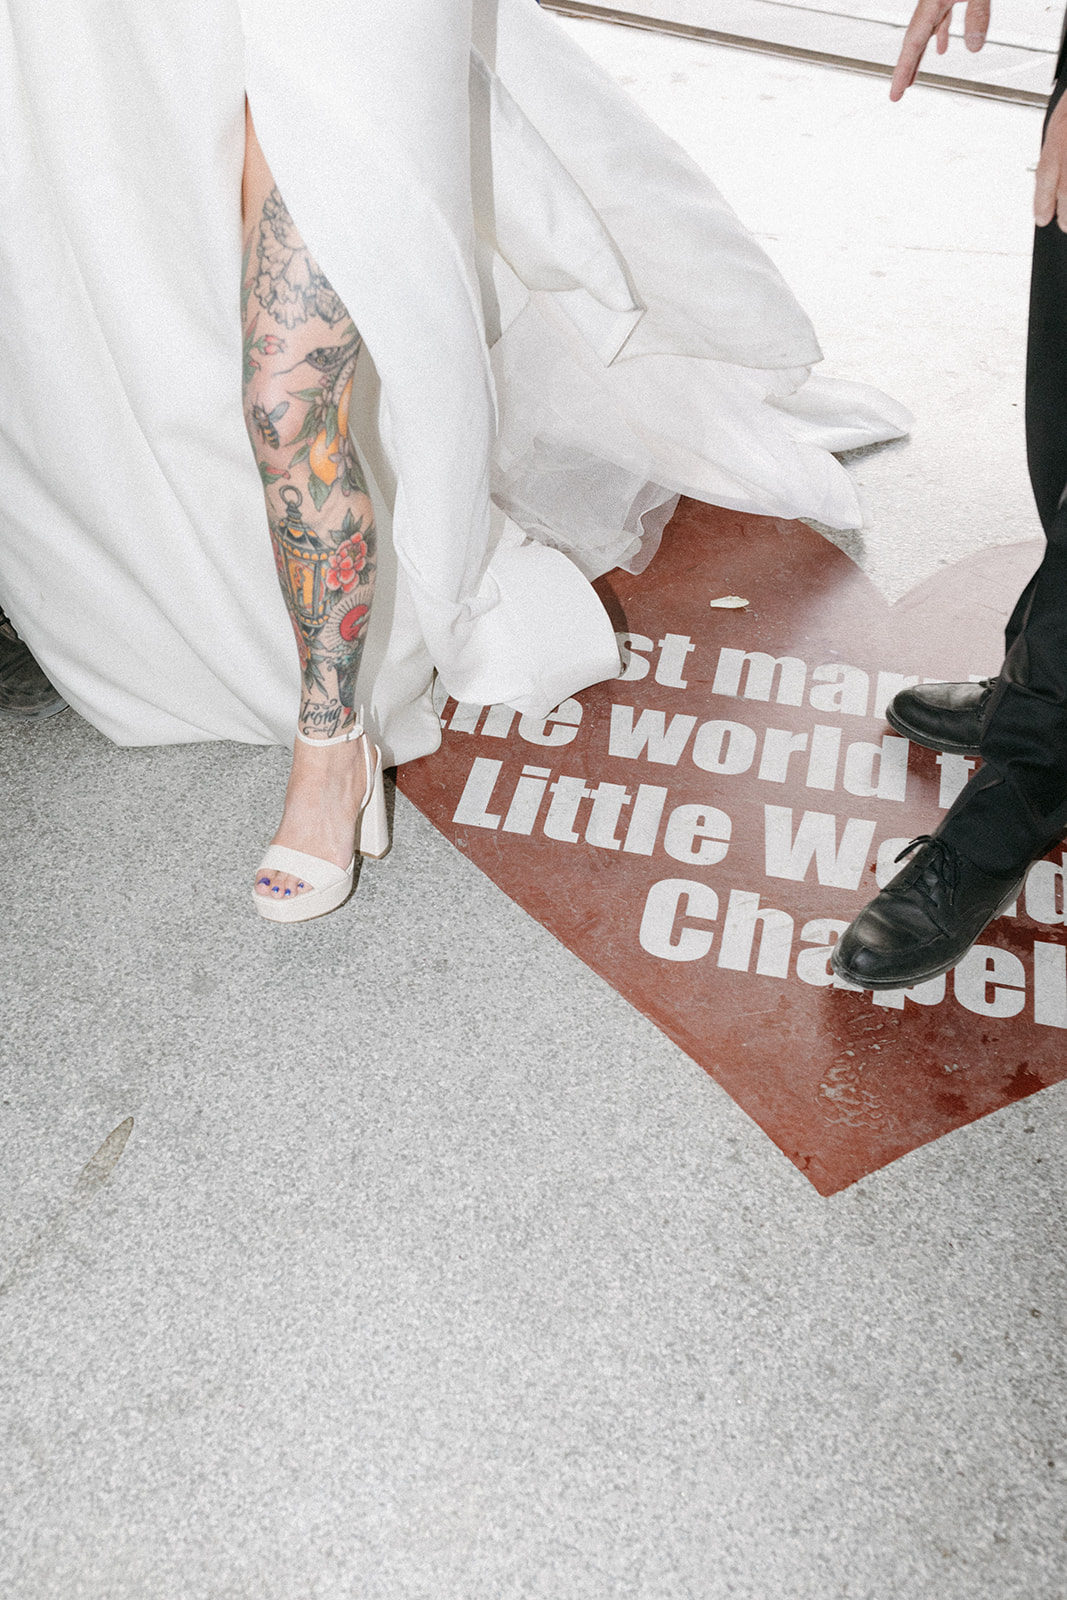 Bride's White Dress with Slit and Block Heels over "Just Married at the world famous Little White Wedding Chapel" heart on the ground 